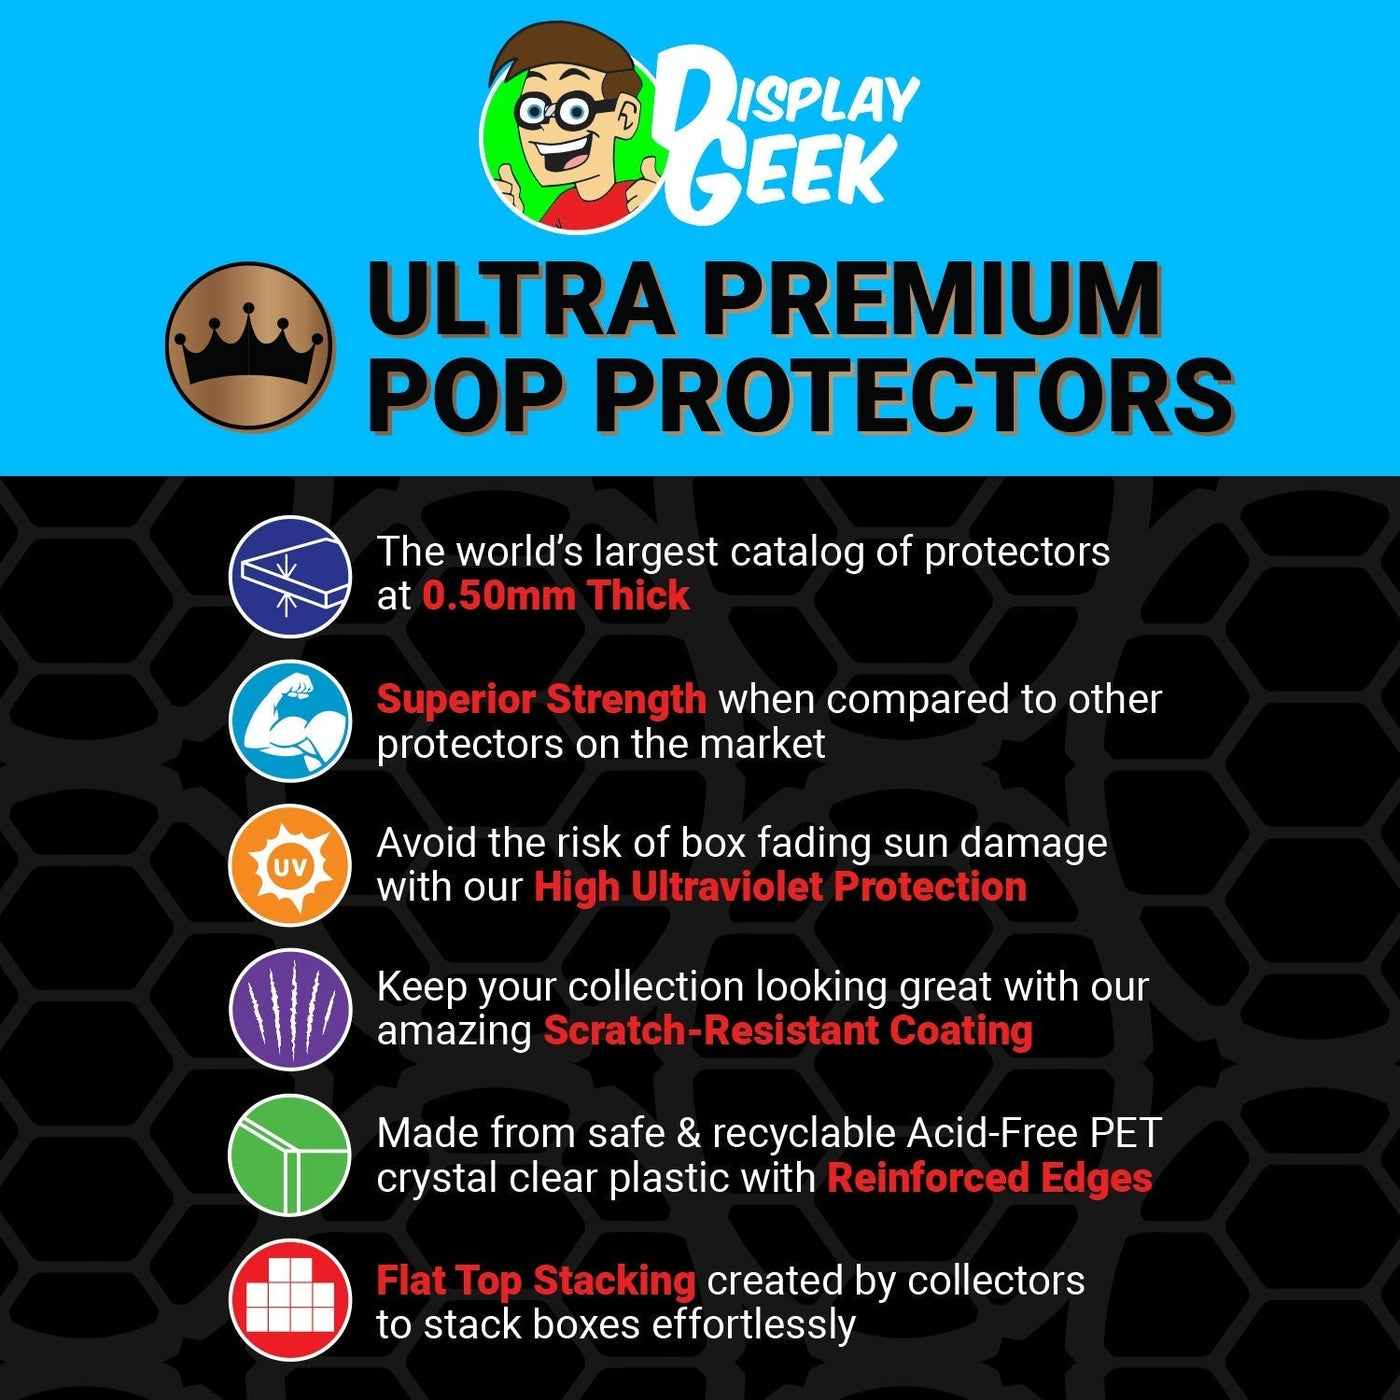 Pop Protector for 3 Pack The Fairly OddParents Funko Pop on The Protector Guide App by Display Geek